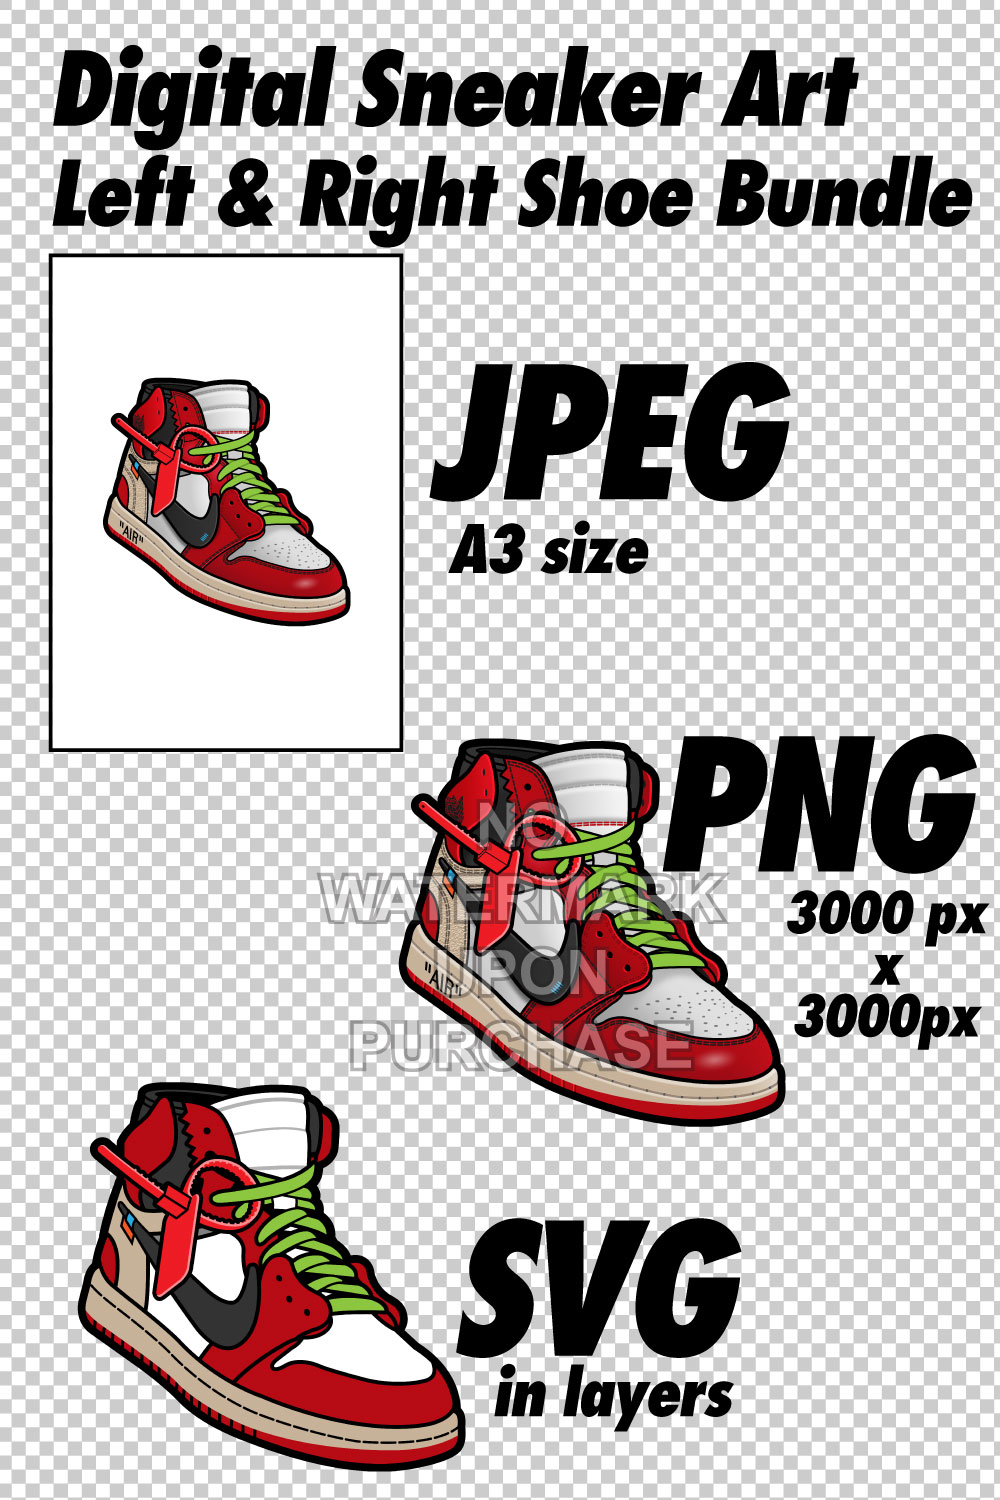 Air Jordan 1 Off White Chicago with Lace Swap in JPEG PNG SVG Sneaker Art right & left shoe bundle pinterest preview image.